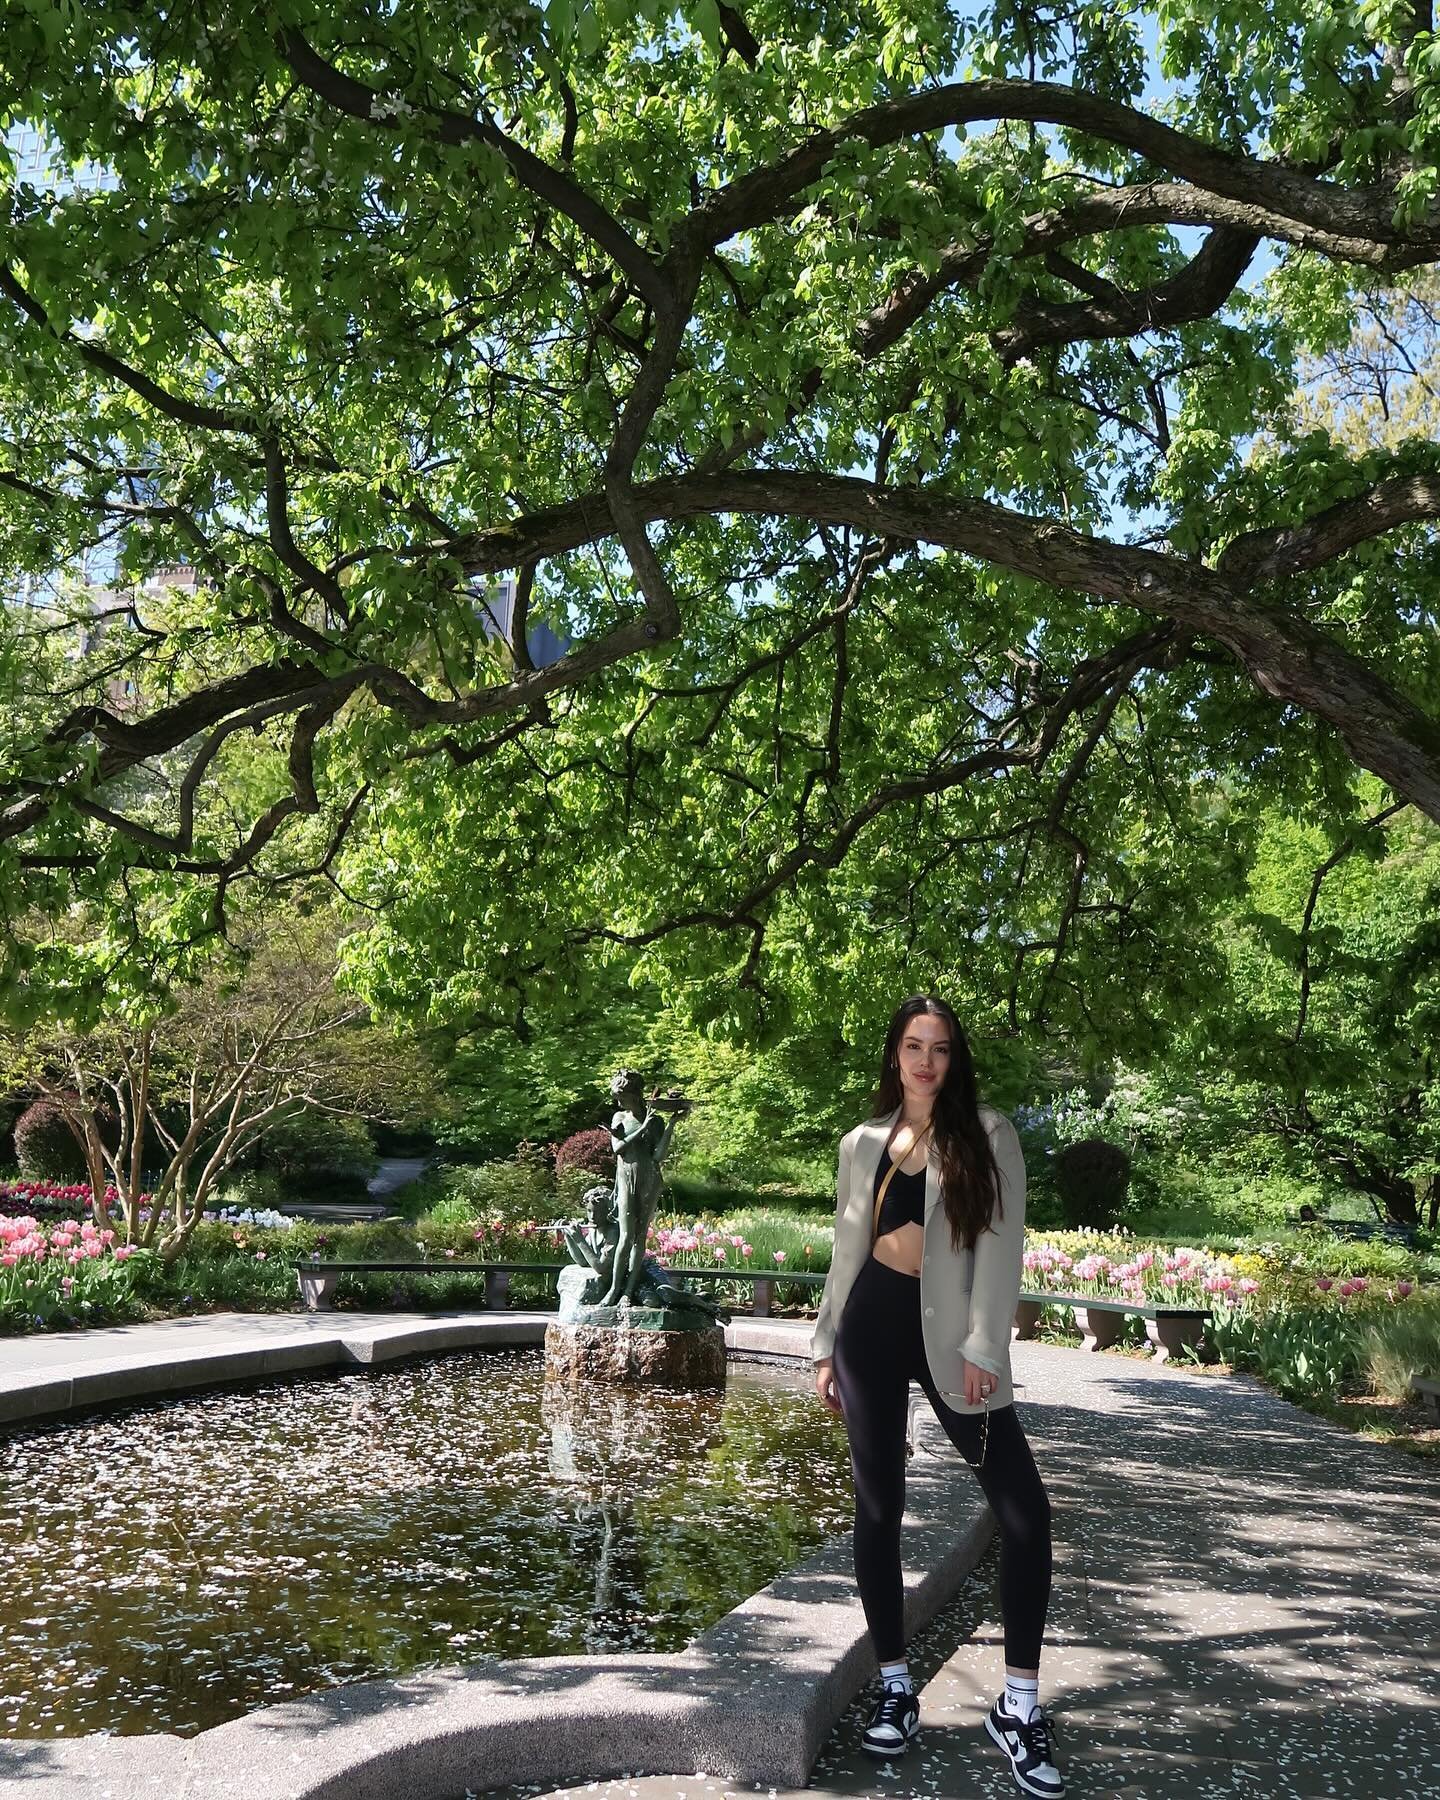 We just experienced the most beautiful morning in Central Park! It was the perfect way to start the day✨🌷

&mdash;
#springinnyc #nycspring #centralparknyc #centralpark #newyorker #newyorkculture #newyorklife #nycrecs